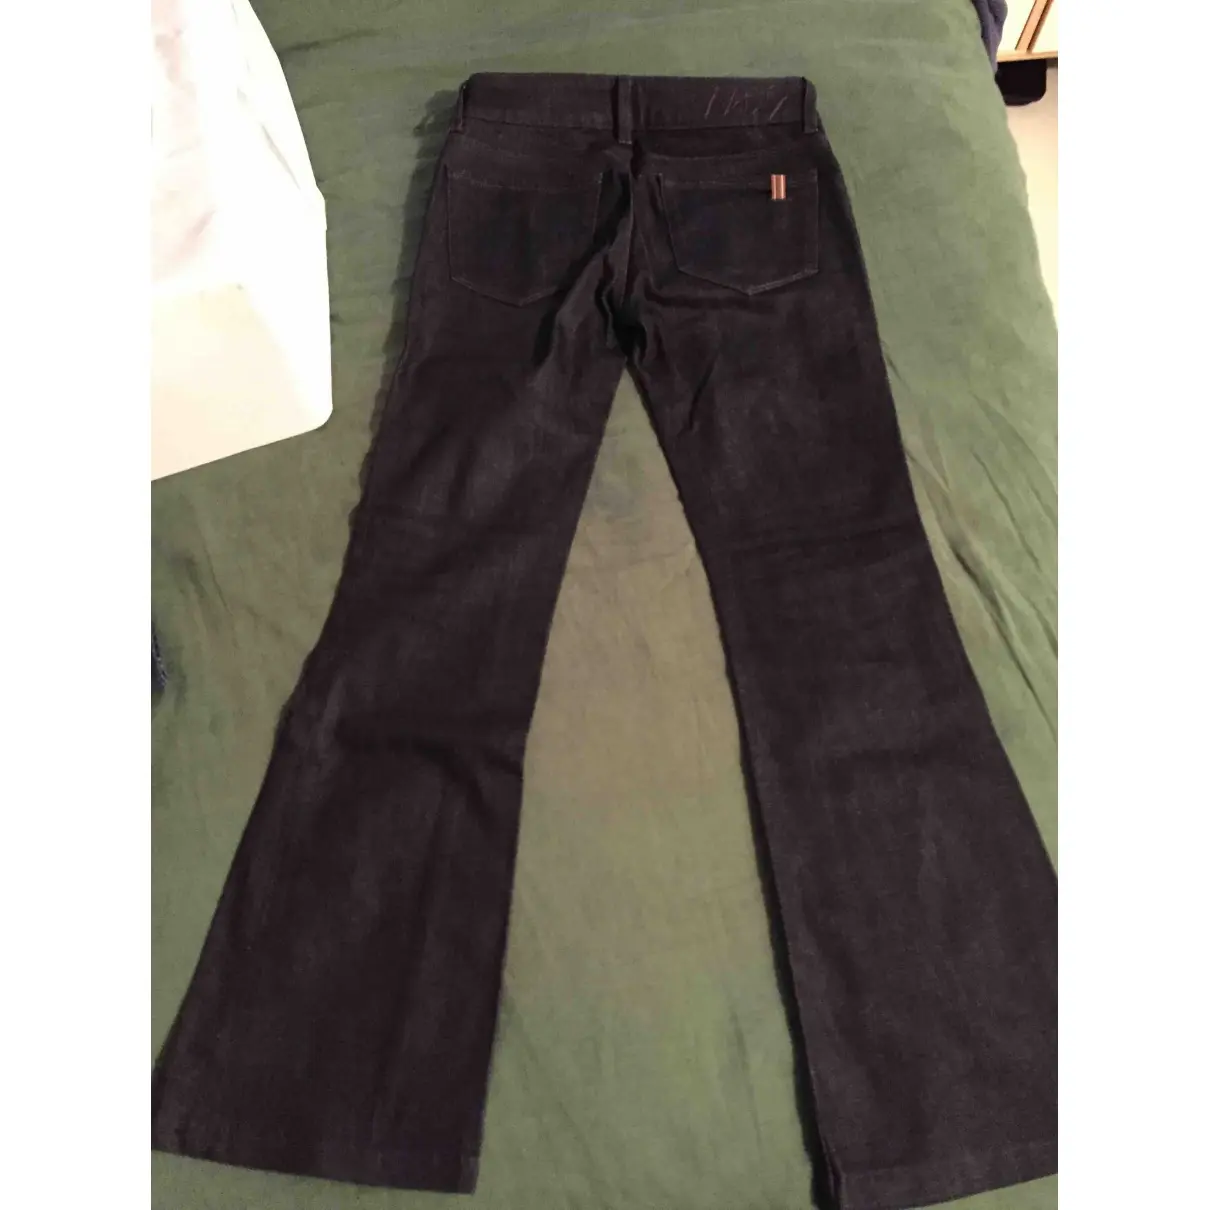 Notify Bootcut jeans for sale